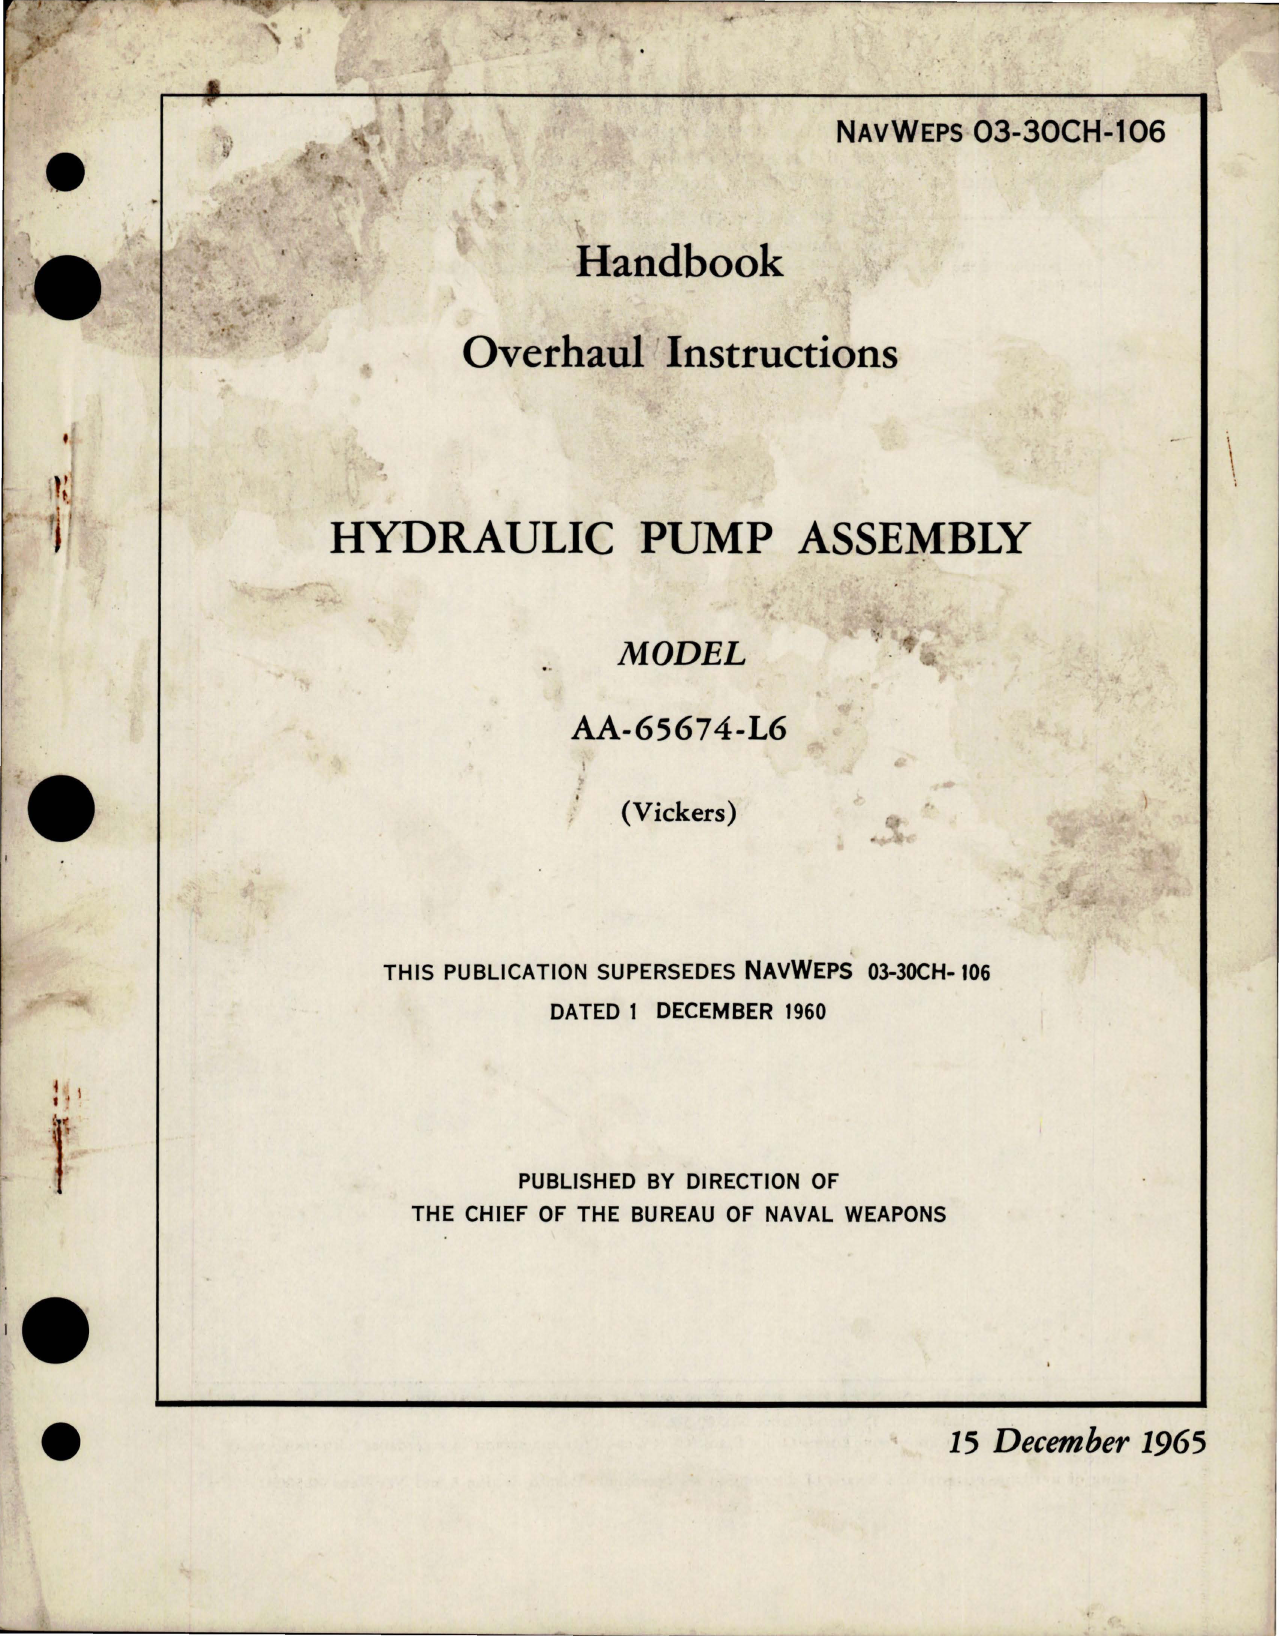 Sample page 1 from AirCorps Library document: Overhaul Instructions for Hydraulic Pump Assembly - Model AA-65674-L6